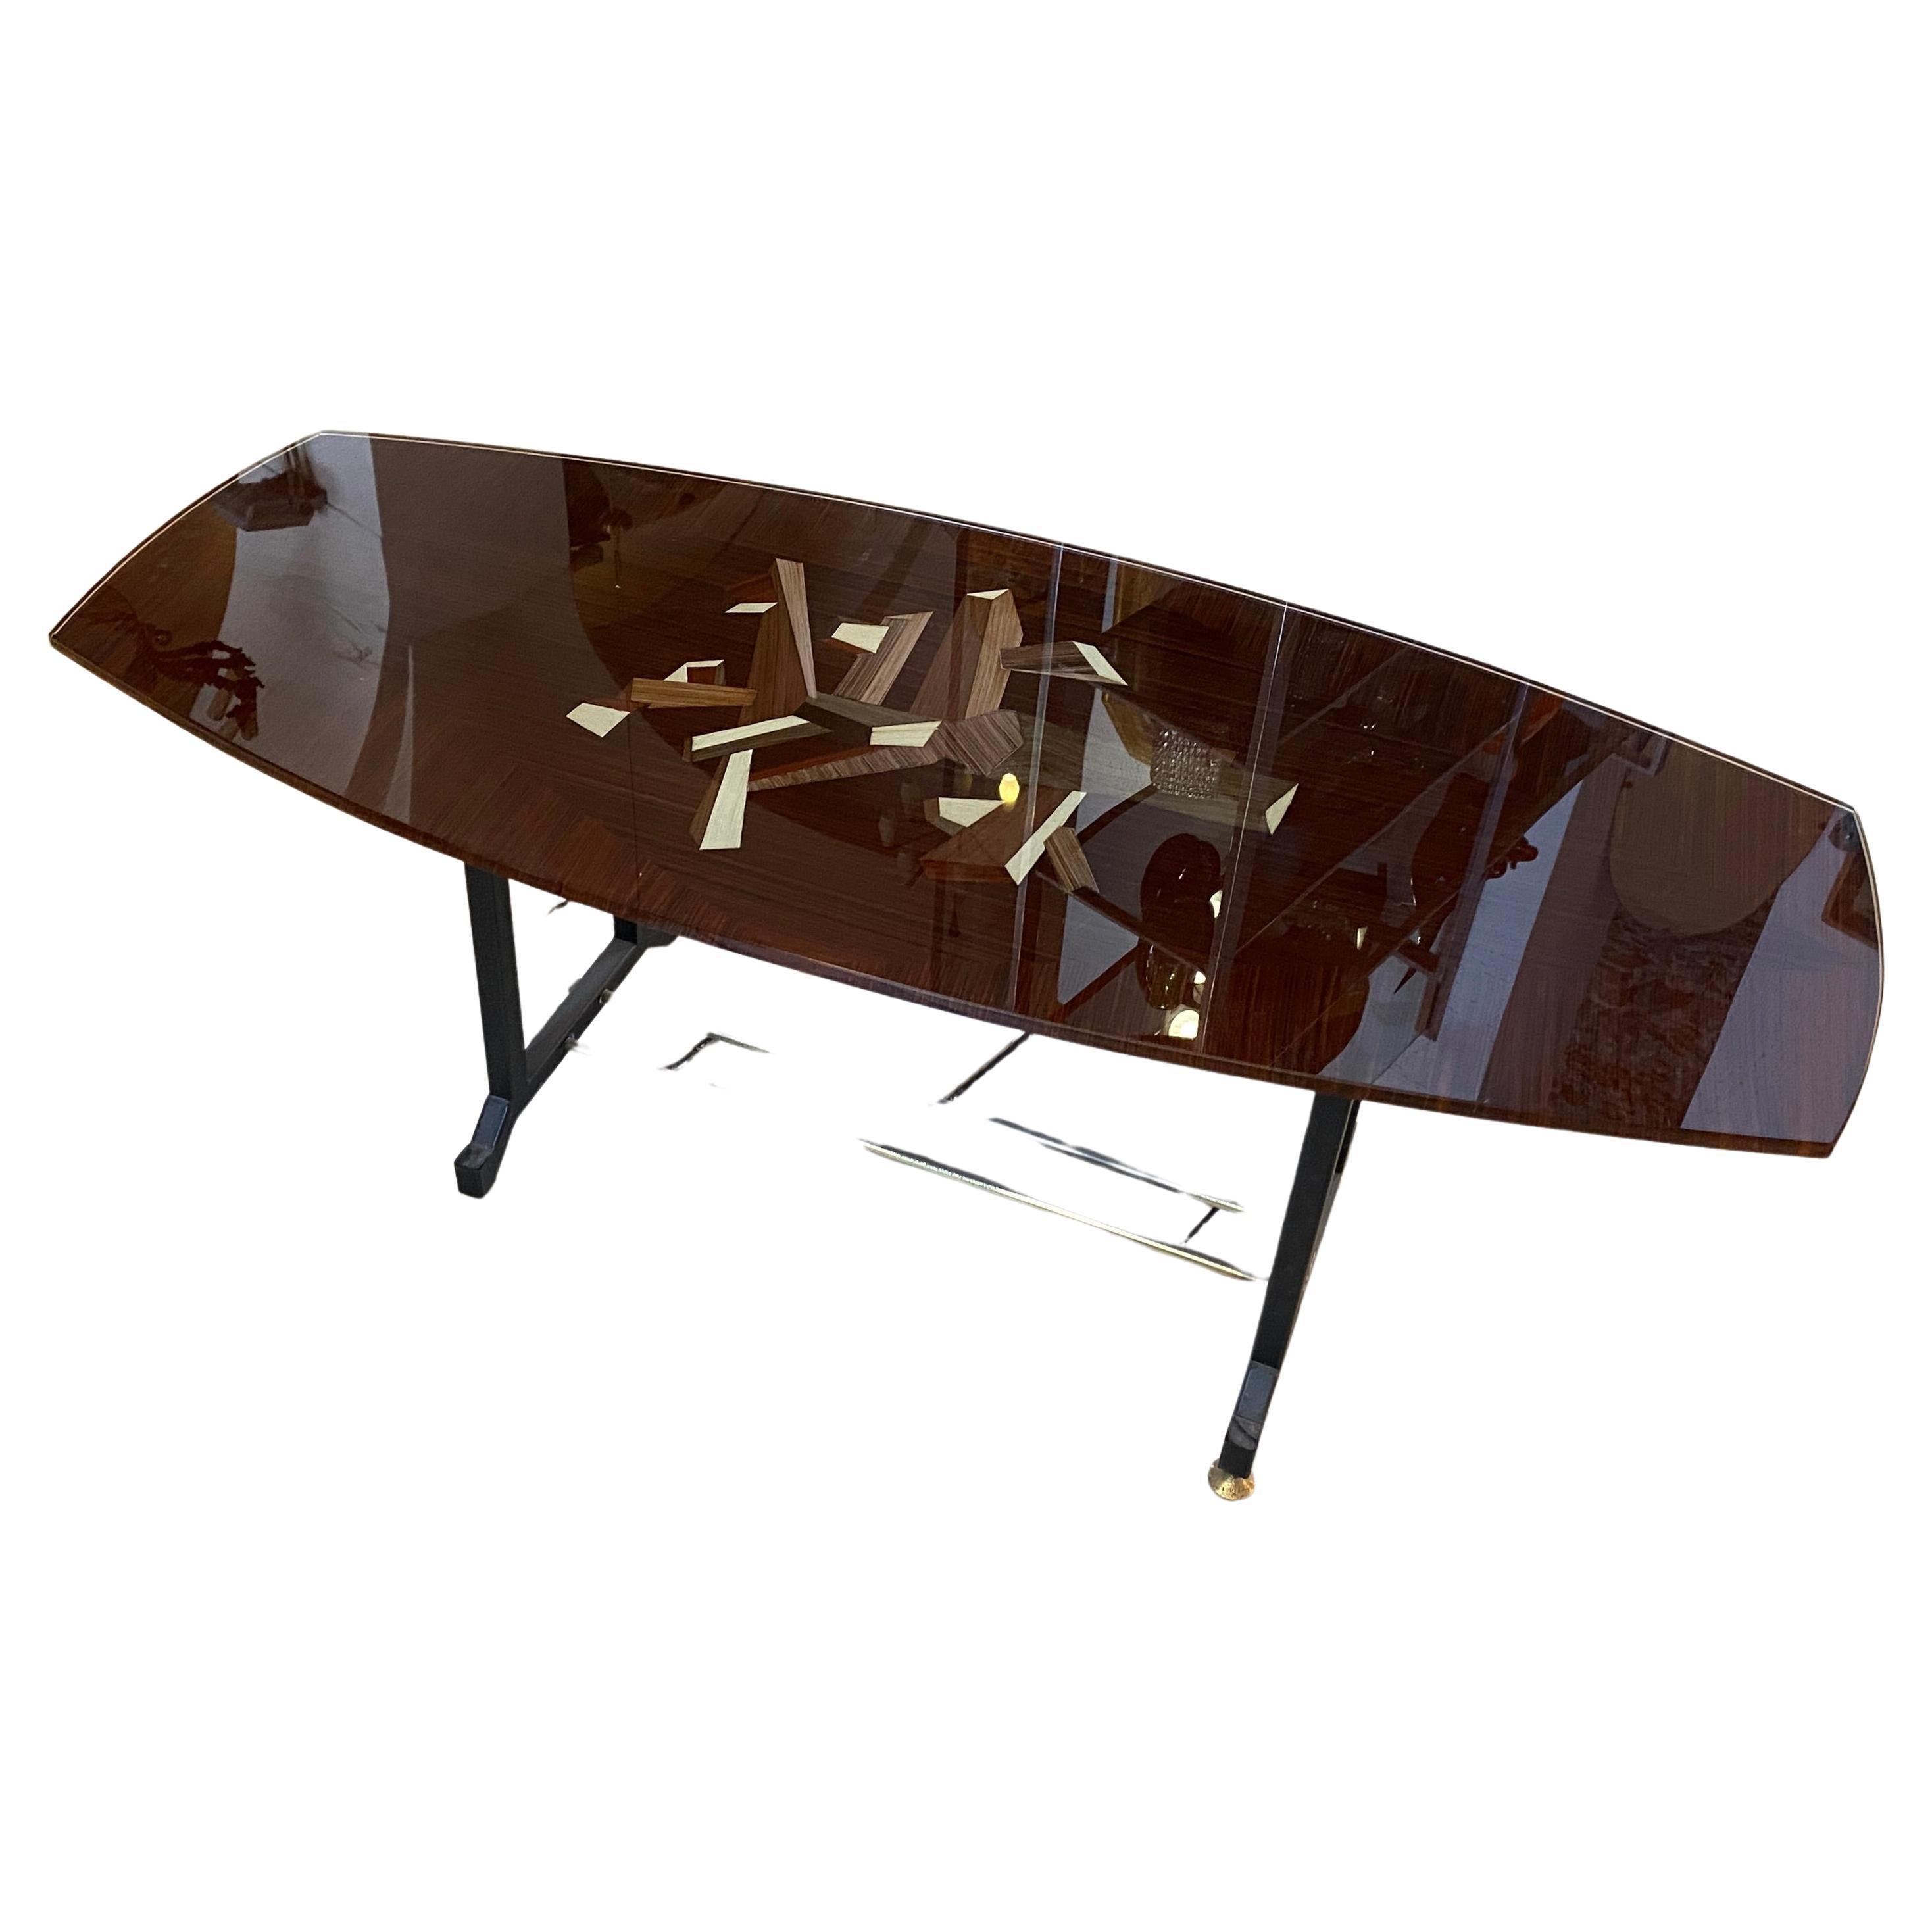 An amazing metal, brass and reverse painted heavy glass octagonal coffee table designed and manufactured in Italy in the style of Fontana Arte. The high quality reverse painting on the glass it's inspired by the metaphysical painting of Giorgio De